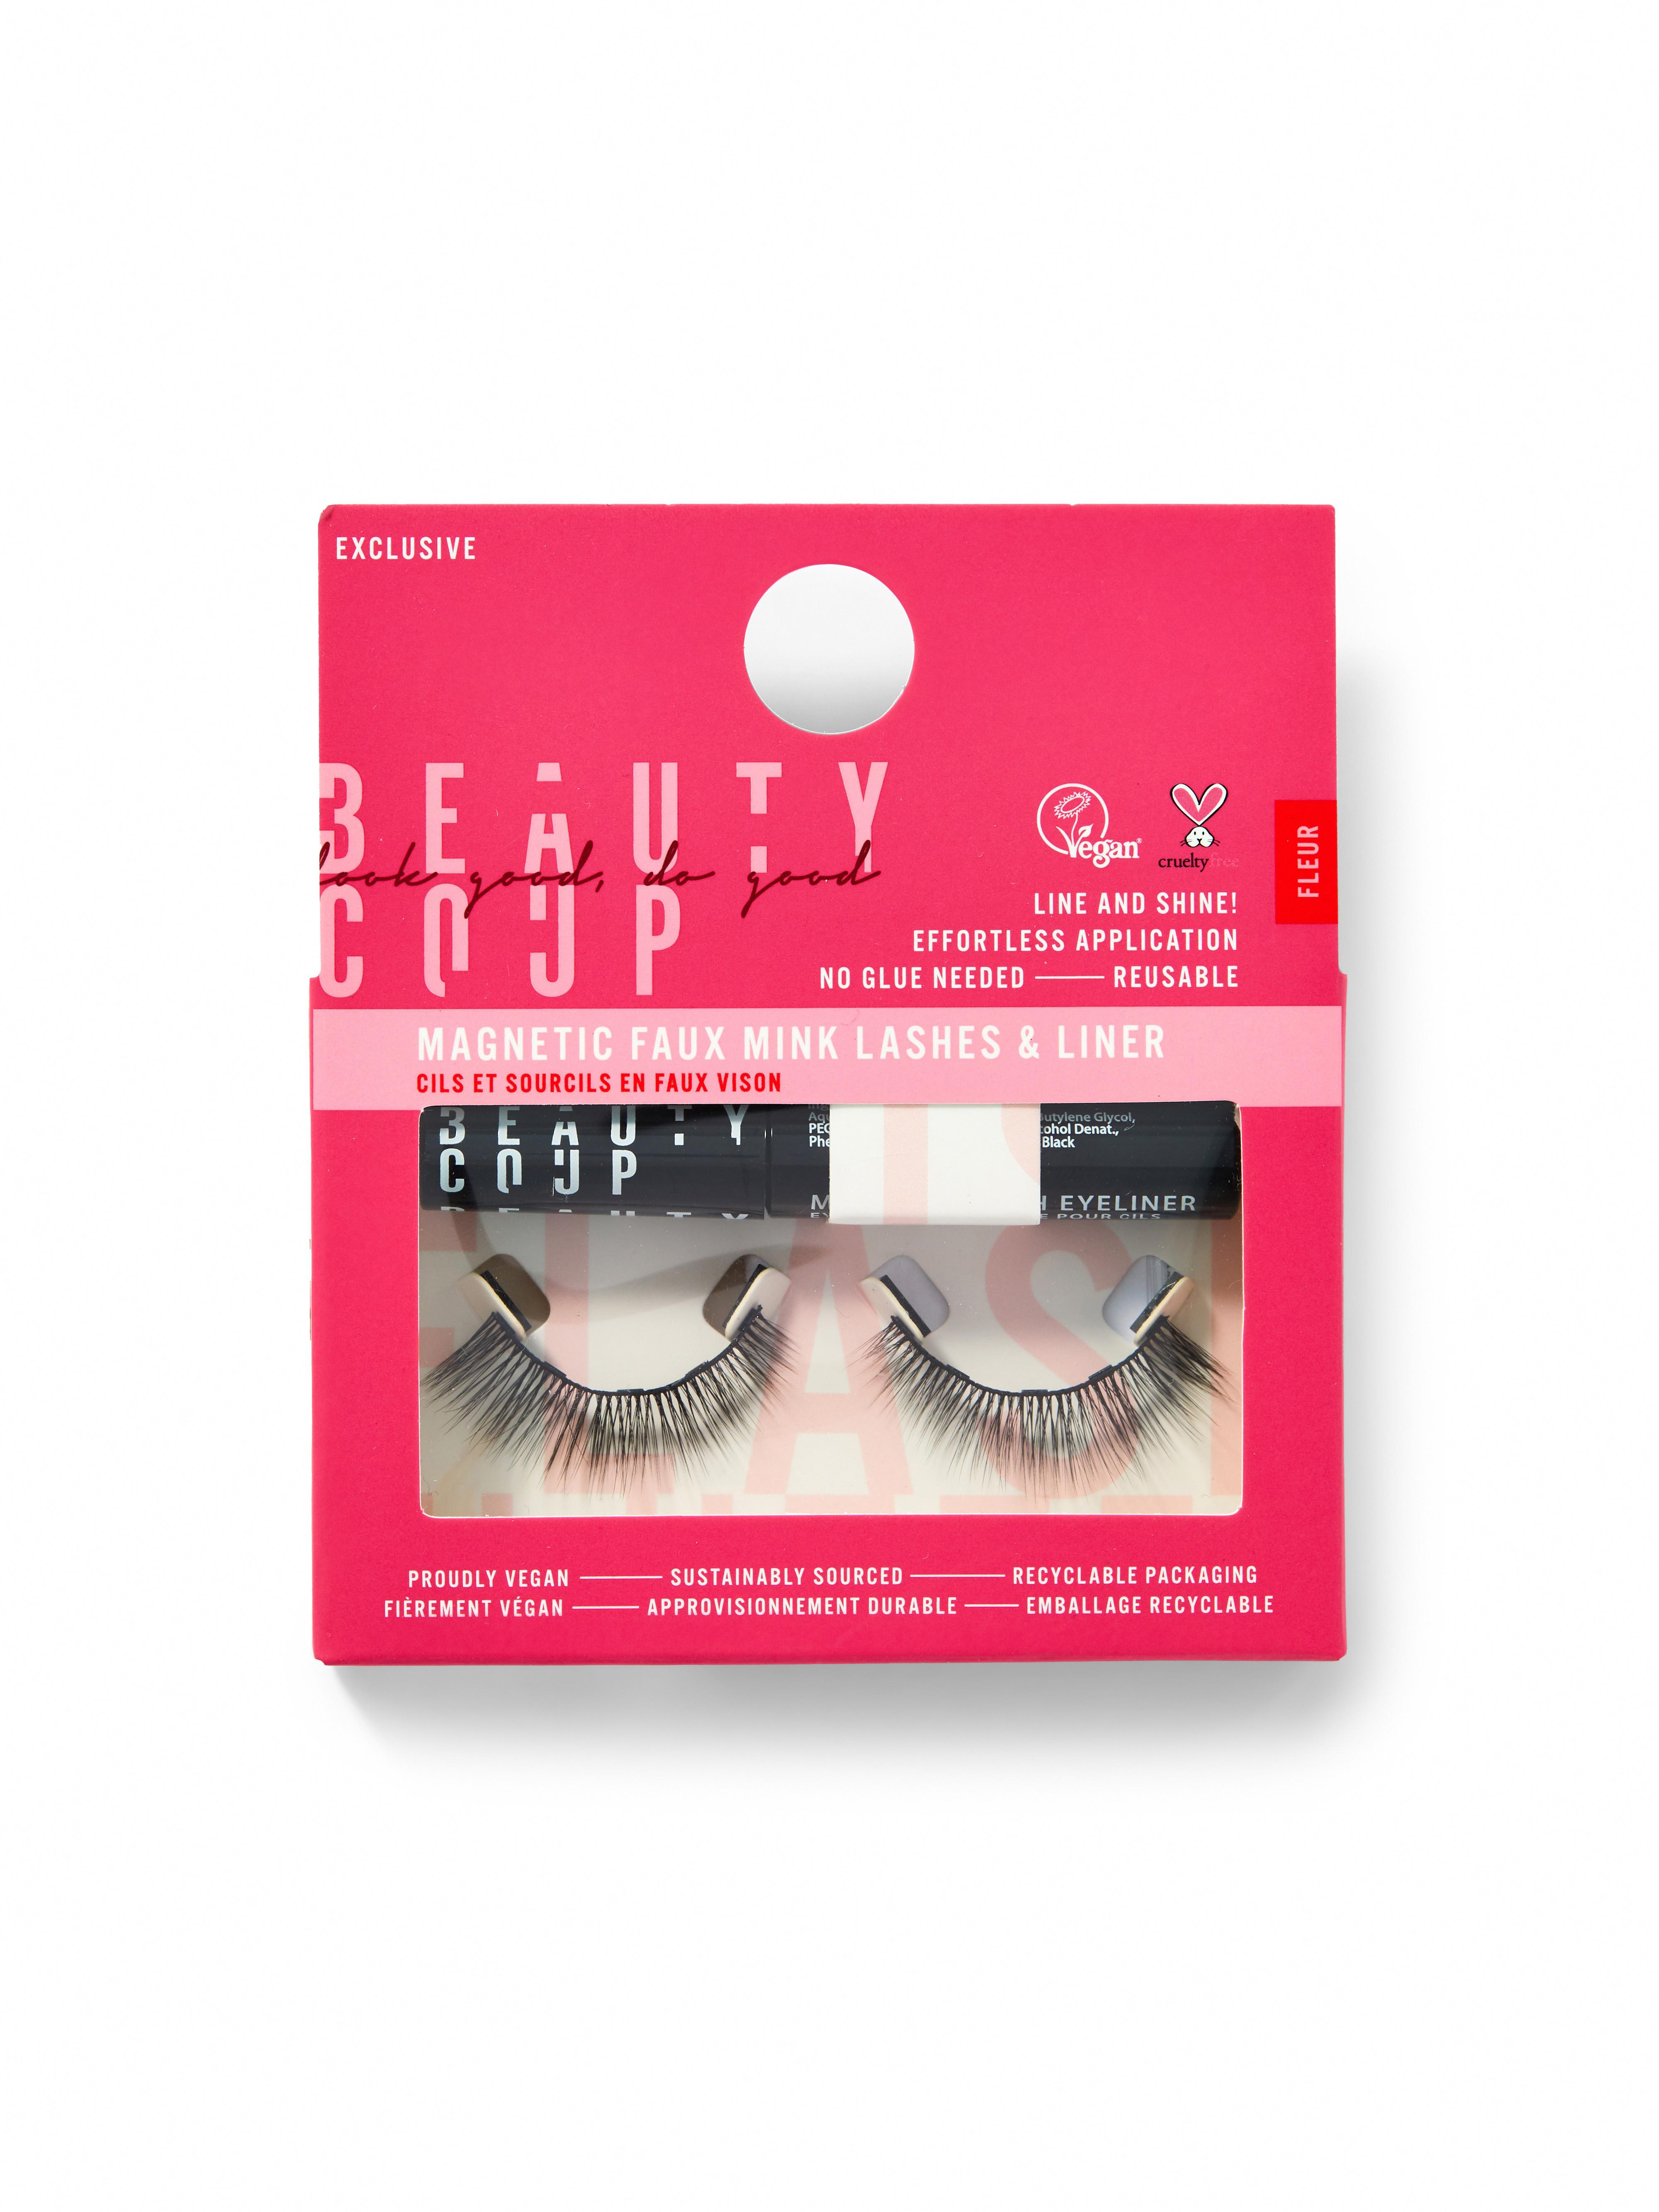 Beauty Coup Magnetic Mink-Look Fake Eyelashes And Liner